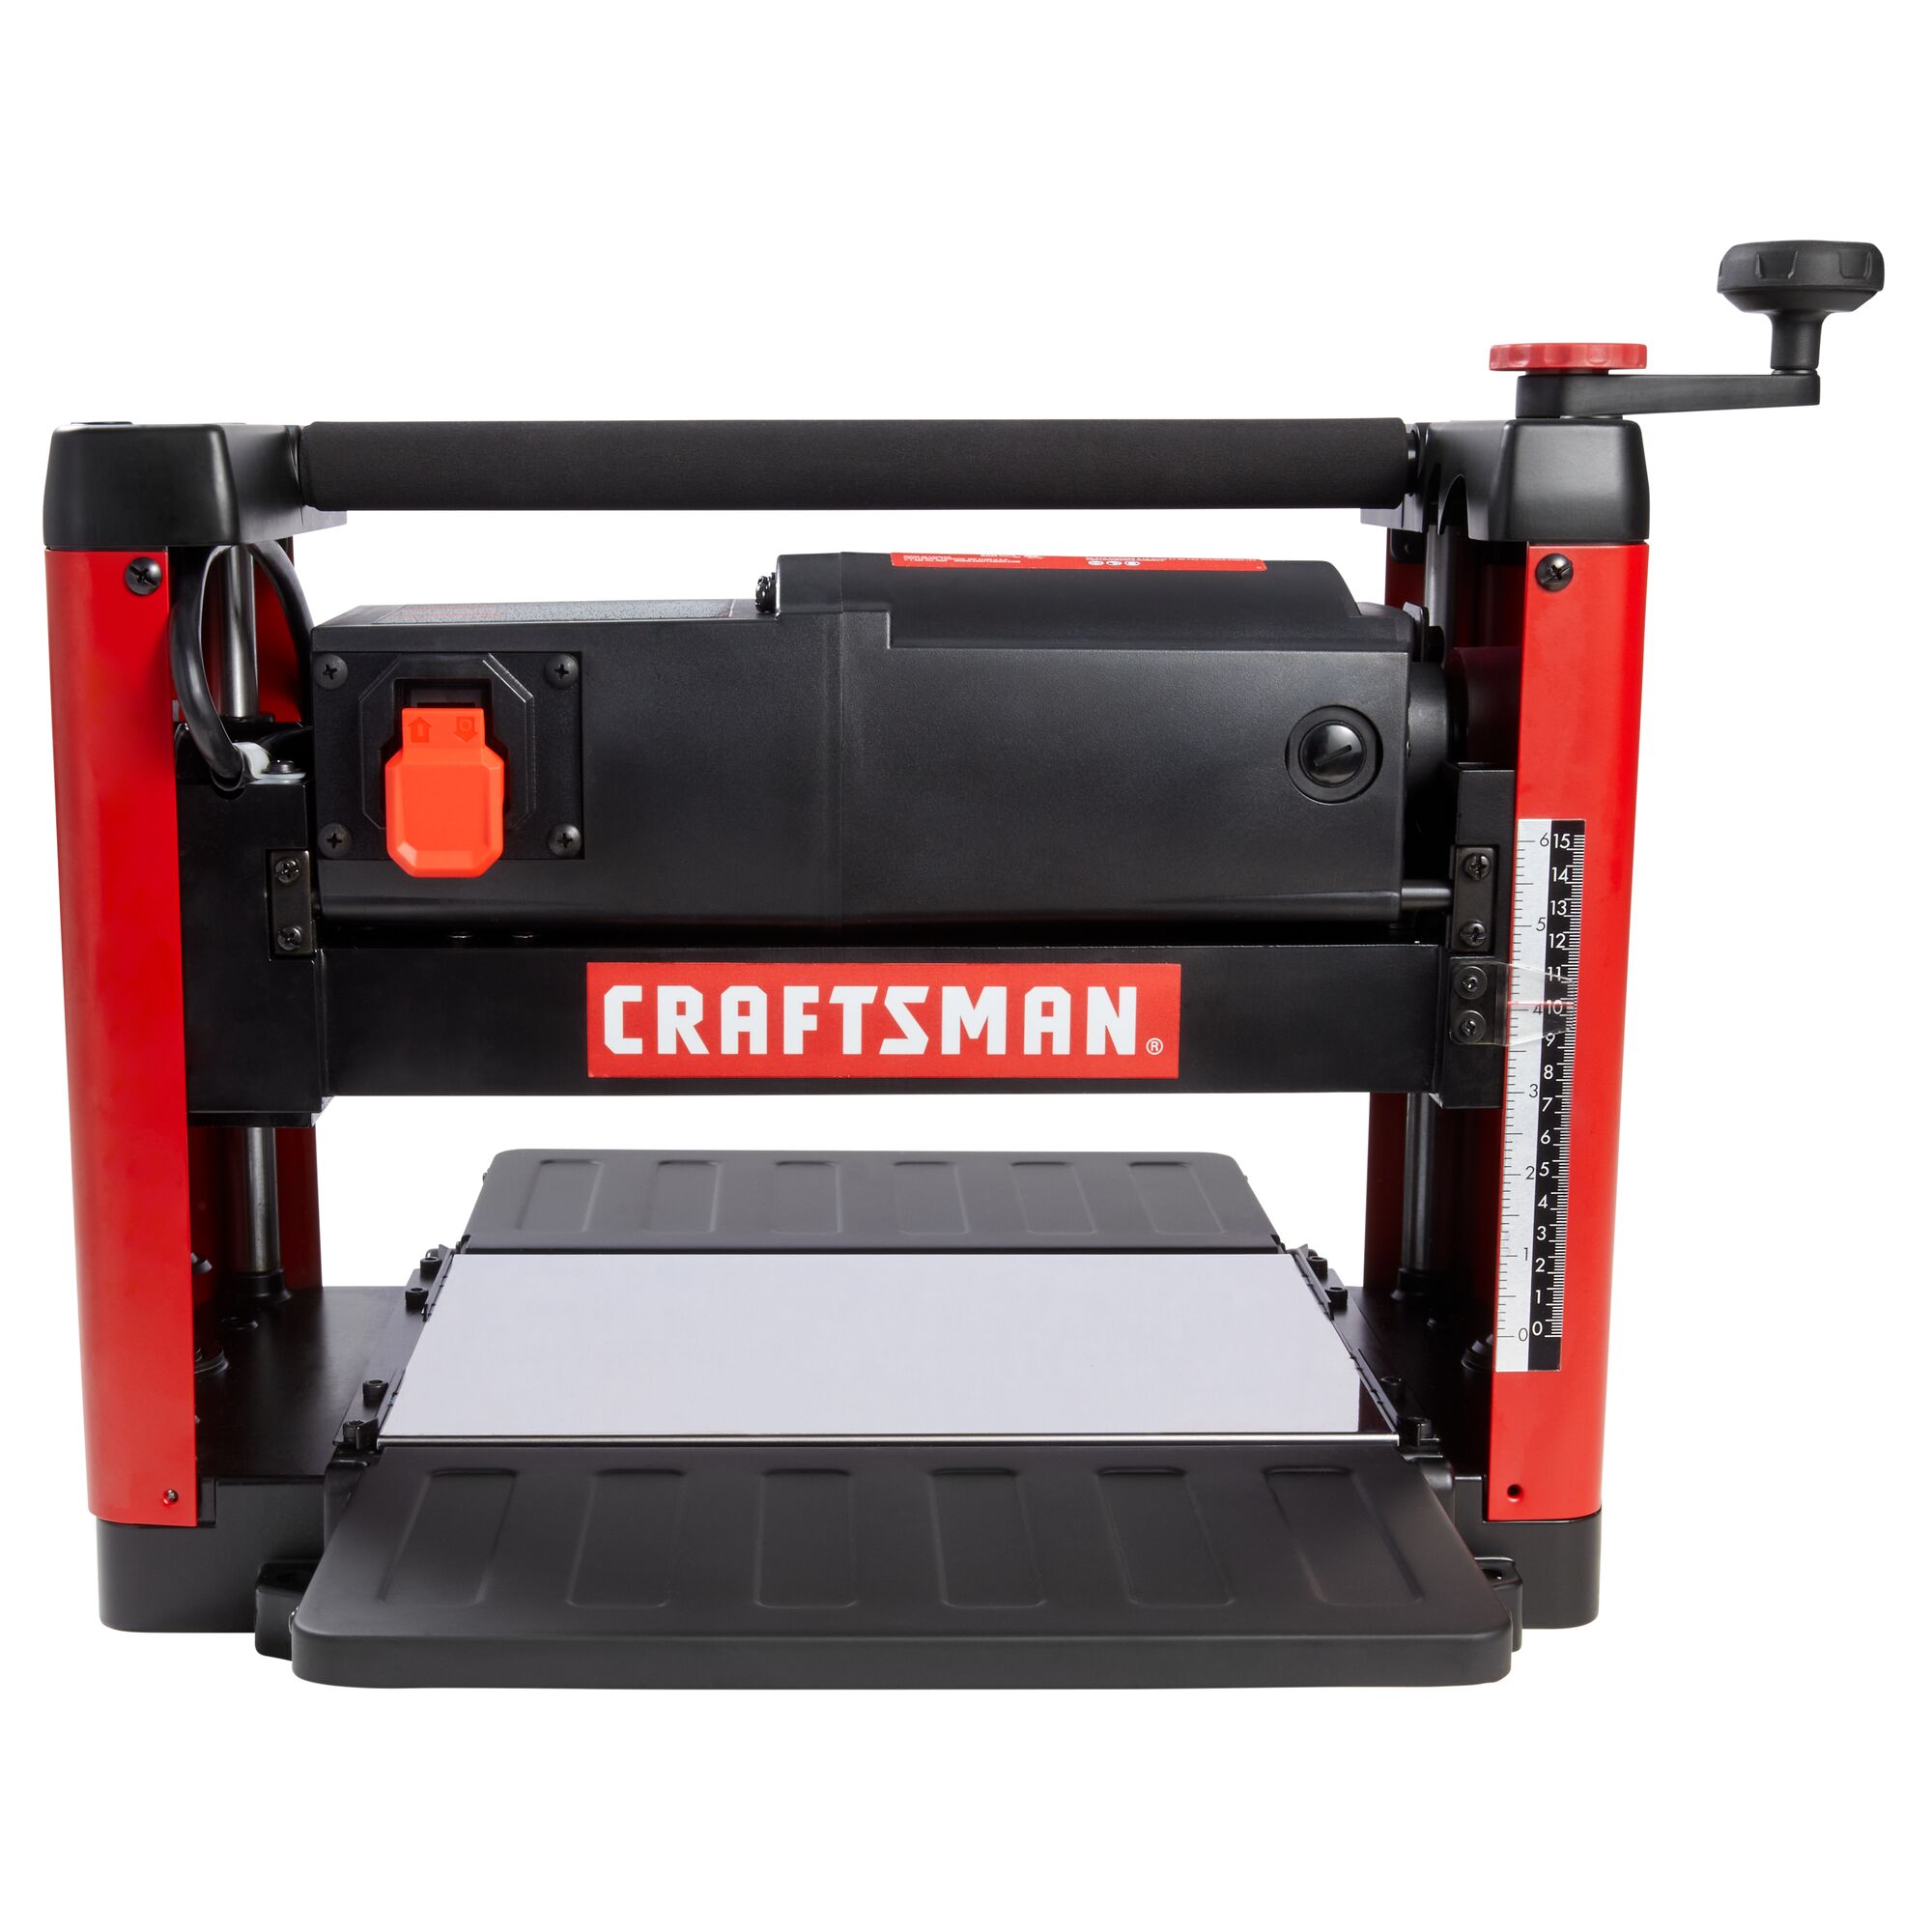 View of CRAFTSMAN Bench & Stationary: Thickness Planers highlighting product features